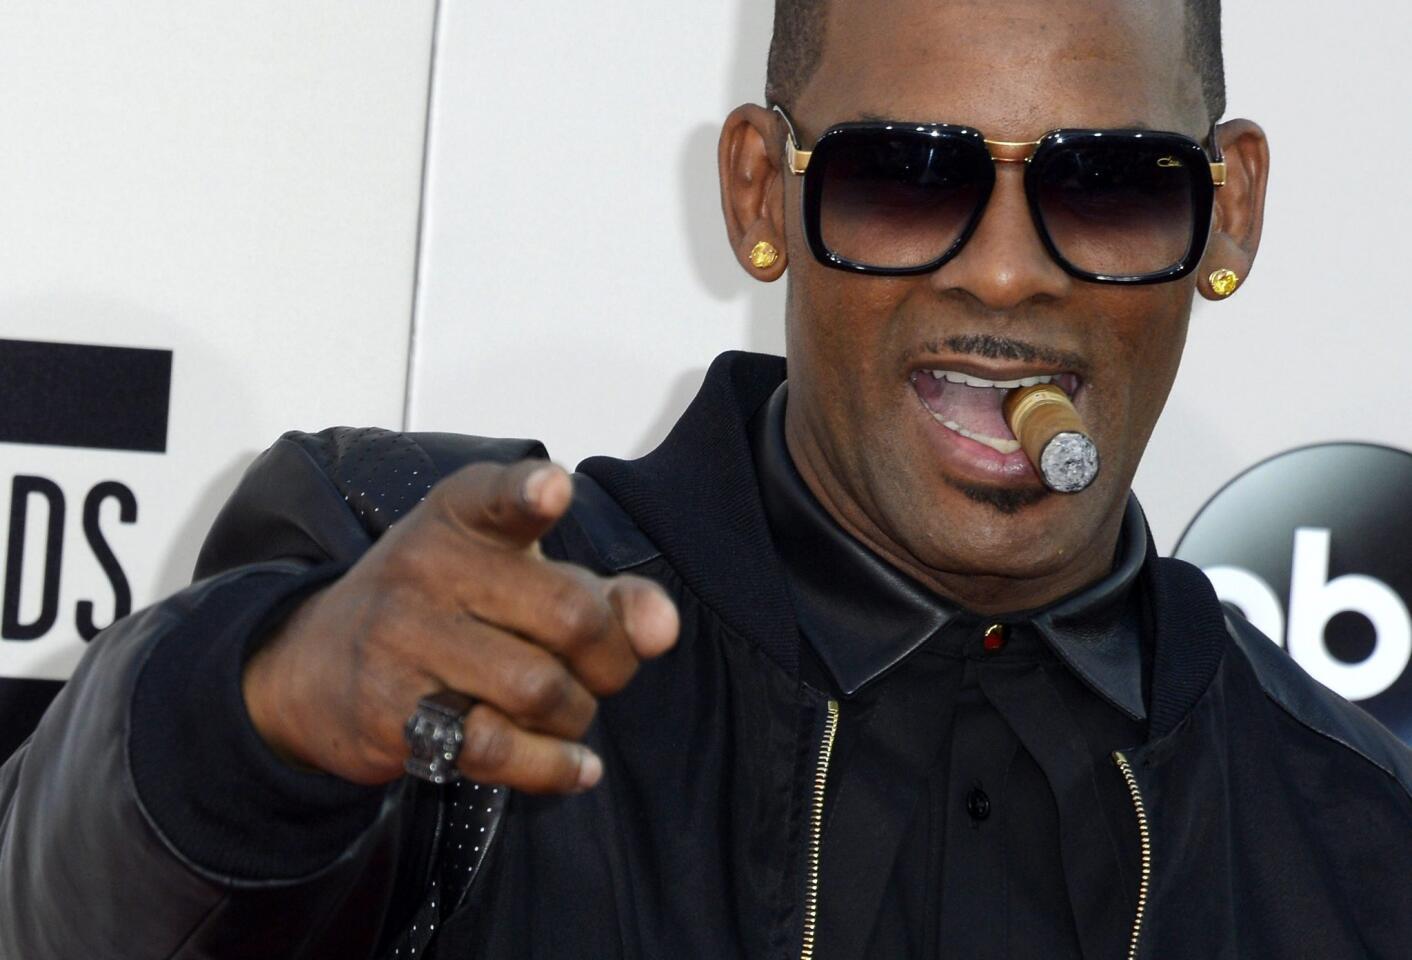 R. Kelly arriving at the American Music Awards